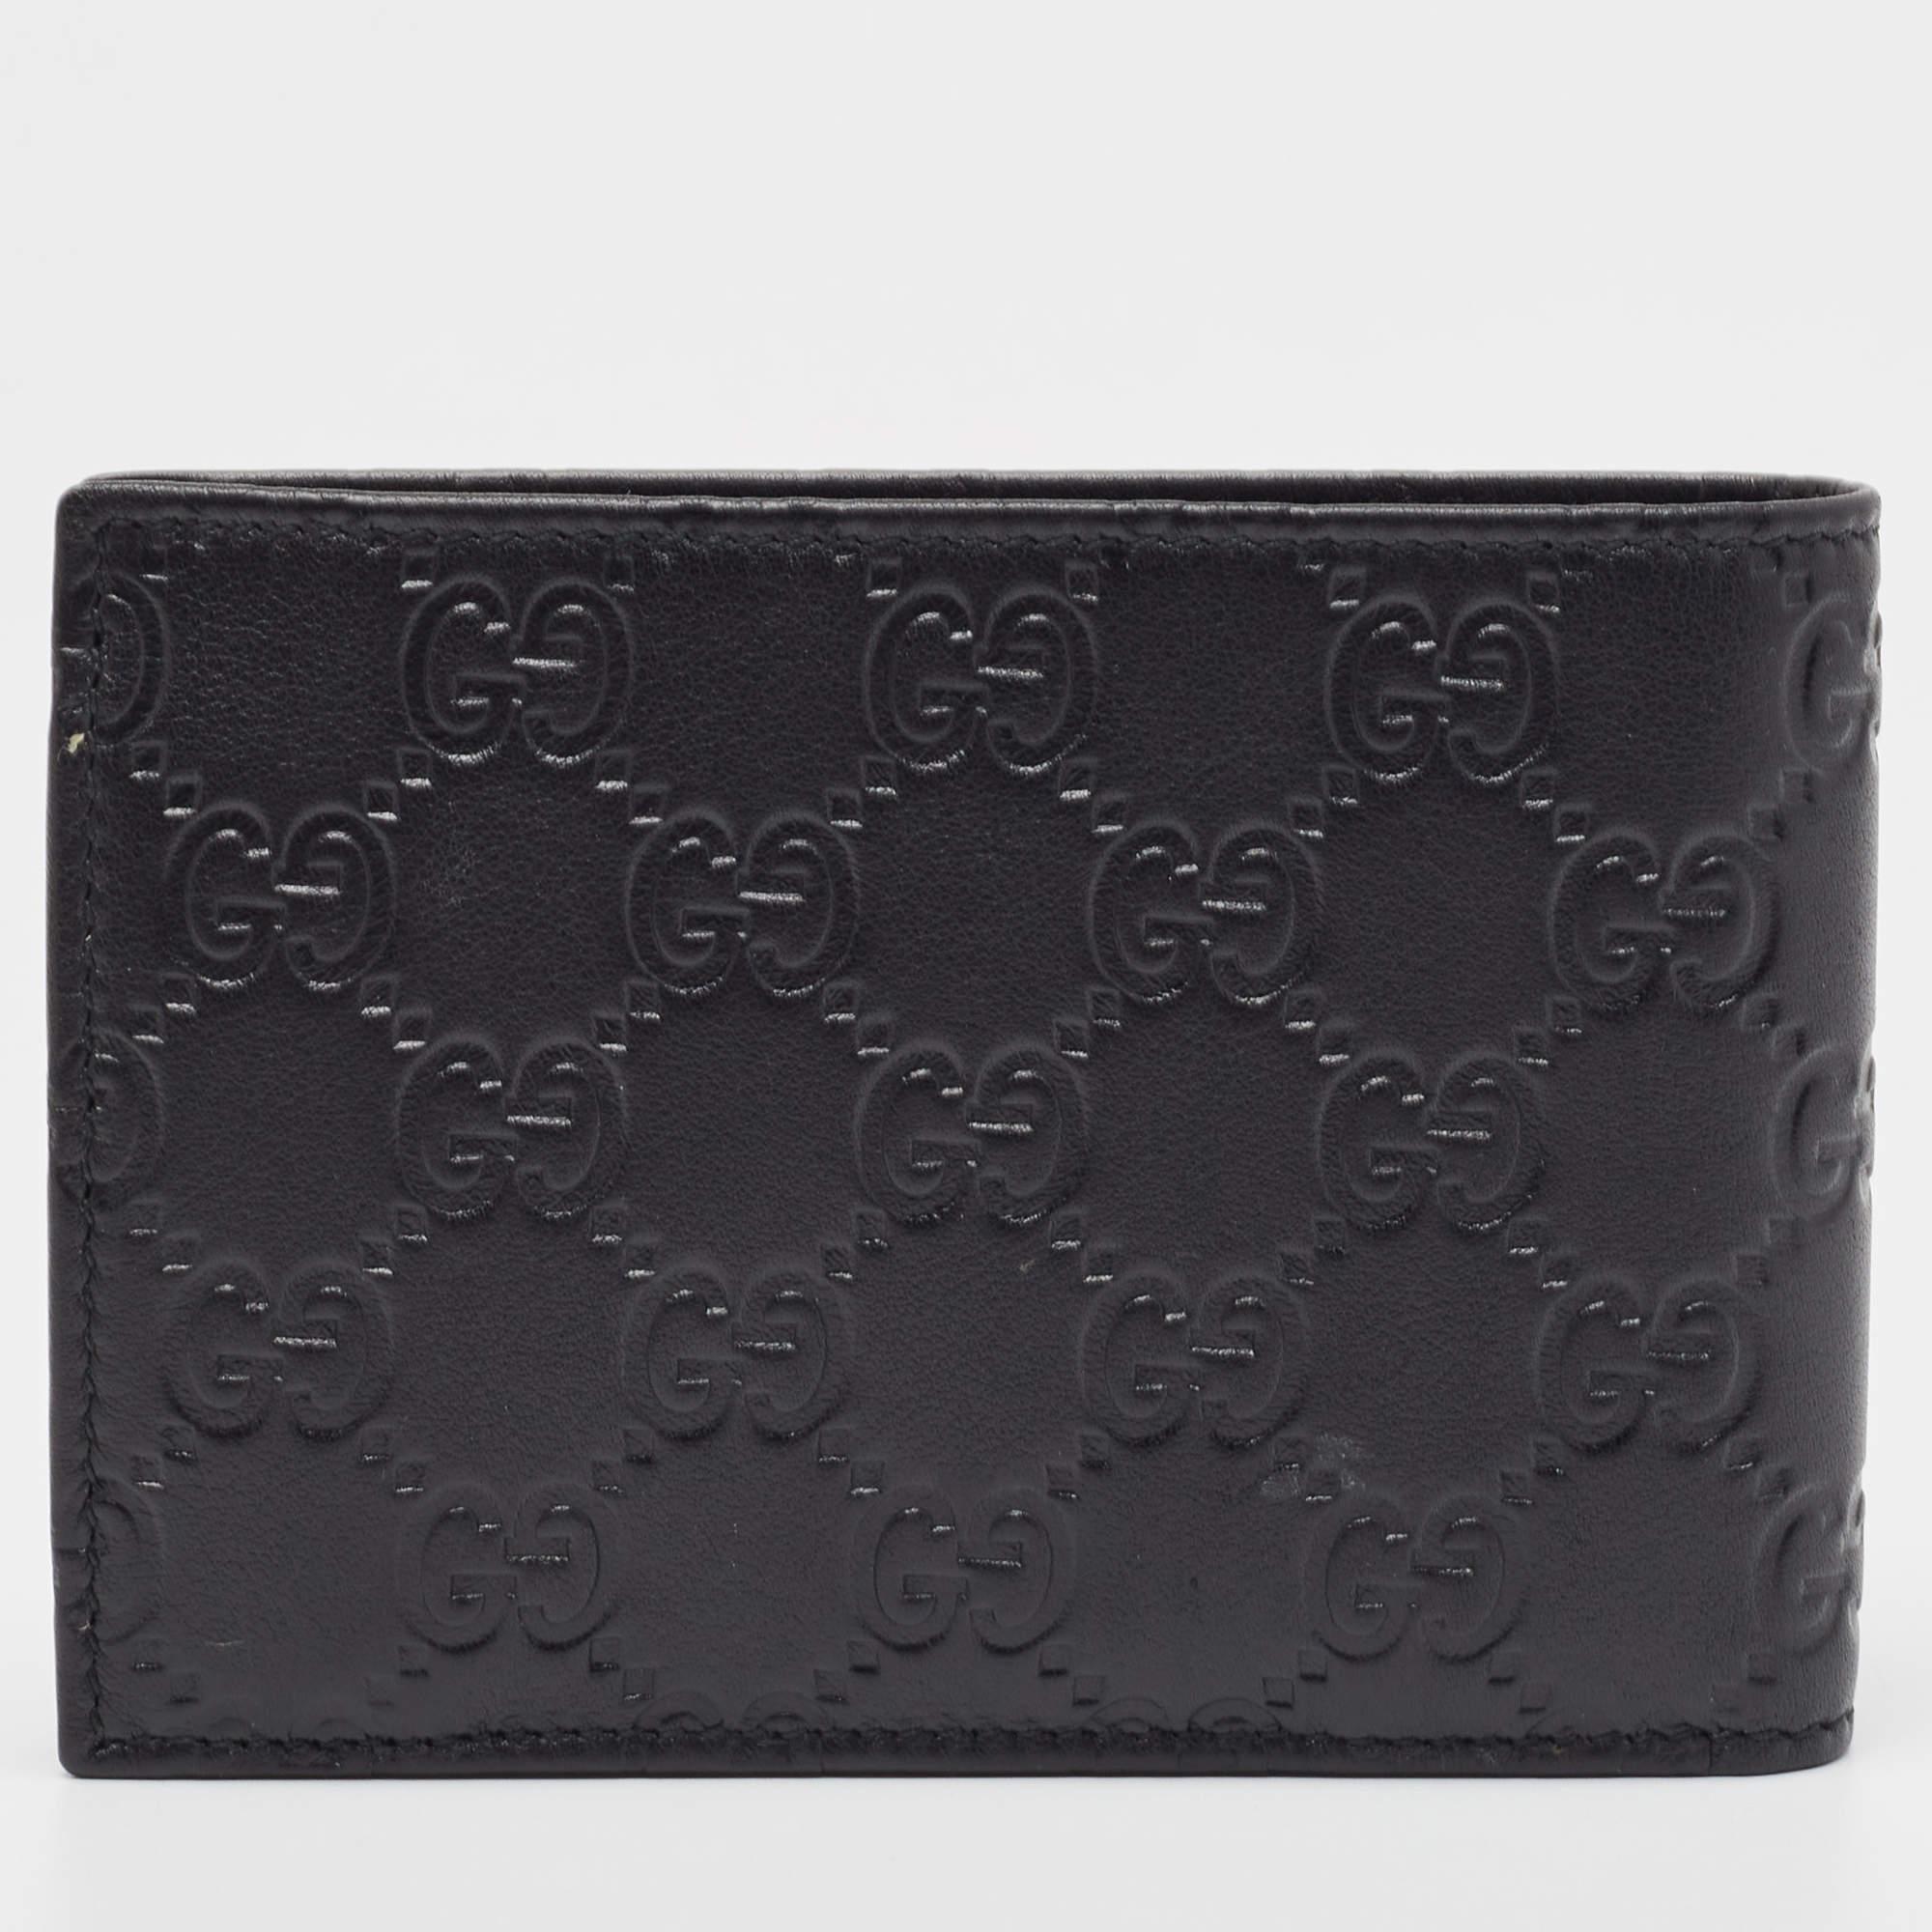 Leather wallets are a true sign of style and reliability. This luxurious wallet from the house of Gucci is made from Guccissima leather and has a sleek design. This bi-fold creation is equipped with multiple card slots and currency compartments.

